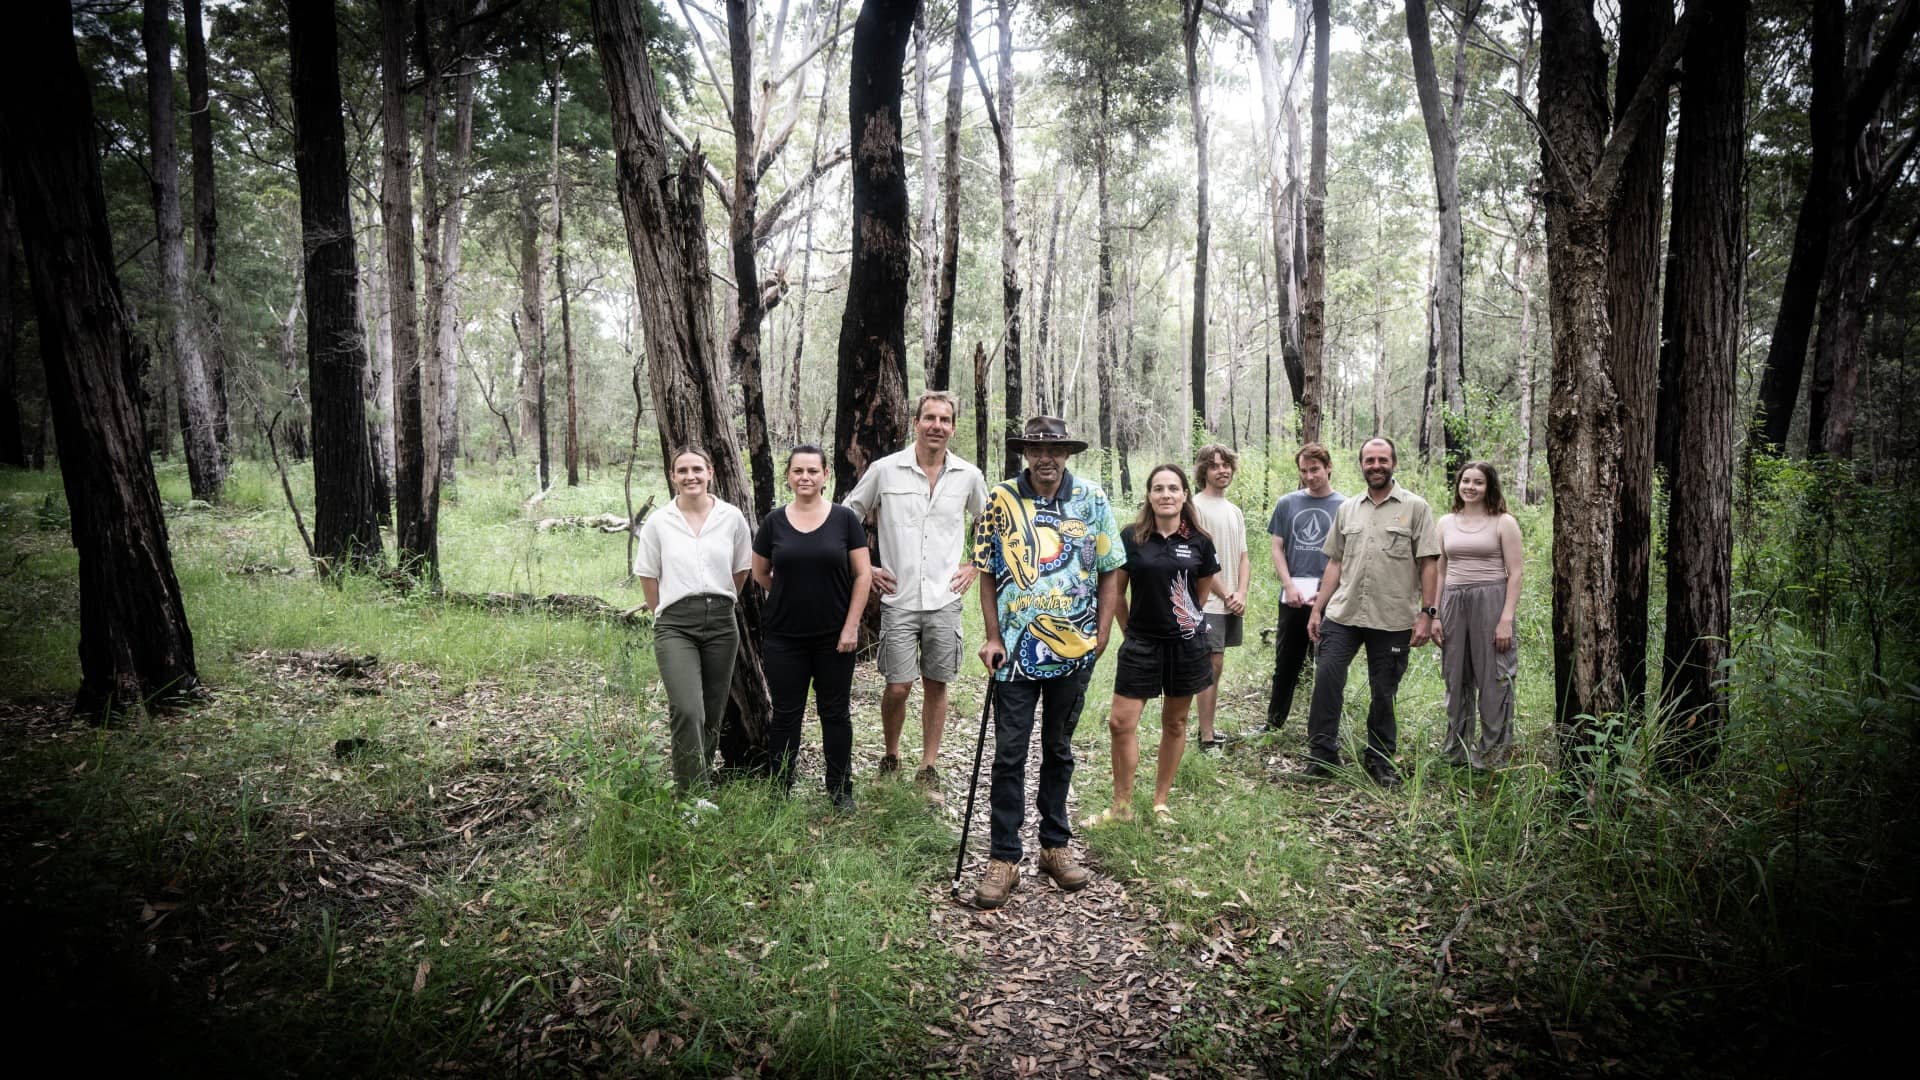 Jessica Davis, Leanne Brook, Anthony Dosseto, Victor Channel, Kat Haynes, Brandon Clarke, Stuart Petty, Nicholas Deutscher and Tahli O'Connor, all pictured standing side by side in bushland on the South Coast. Photo: Paul Jones